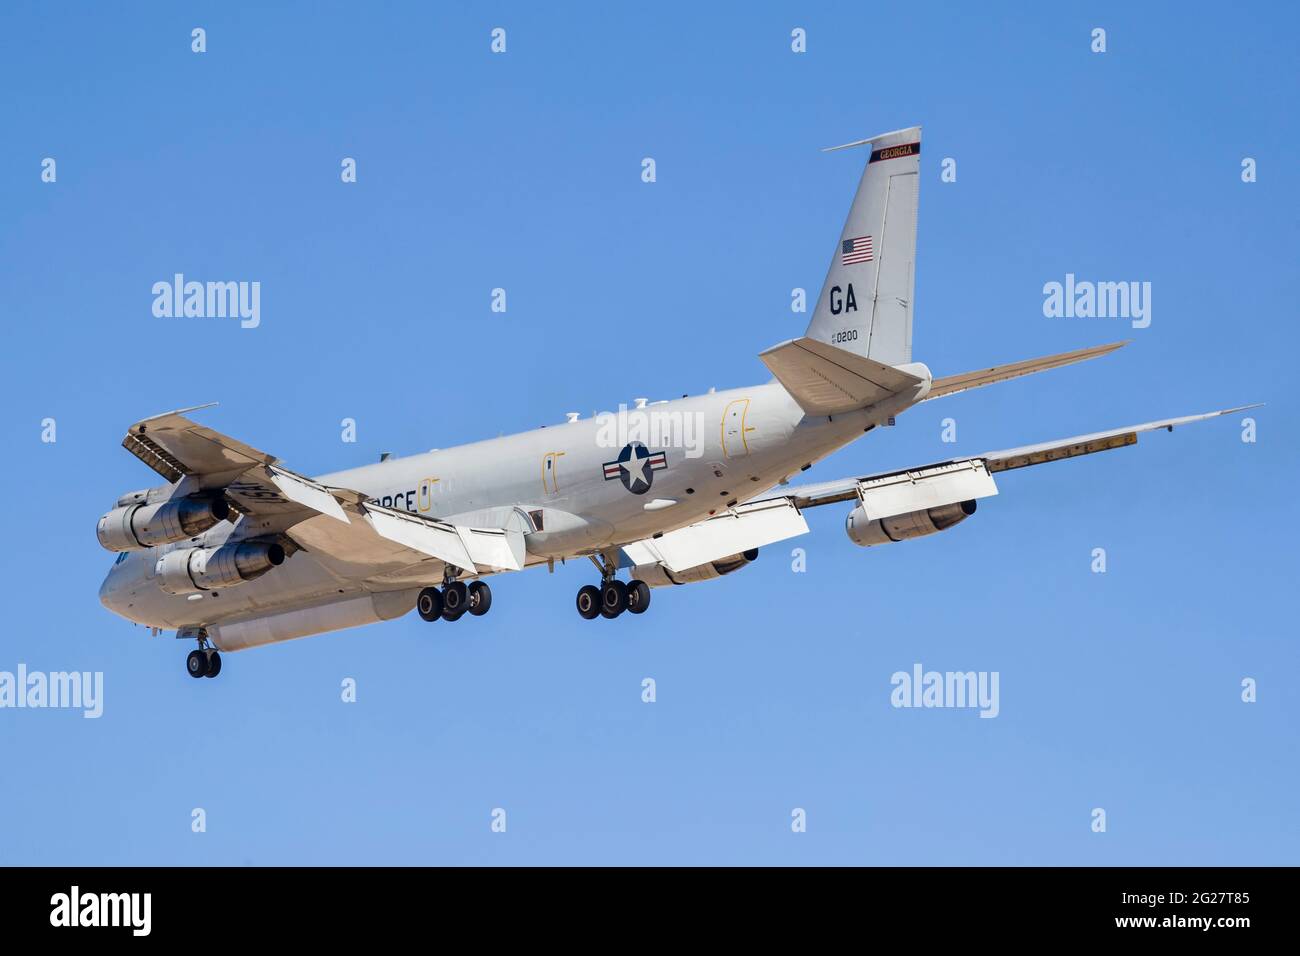 A U.S. Air Force E-8C JSTARS command and control aircraft. Stock Photo